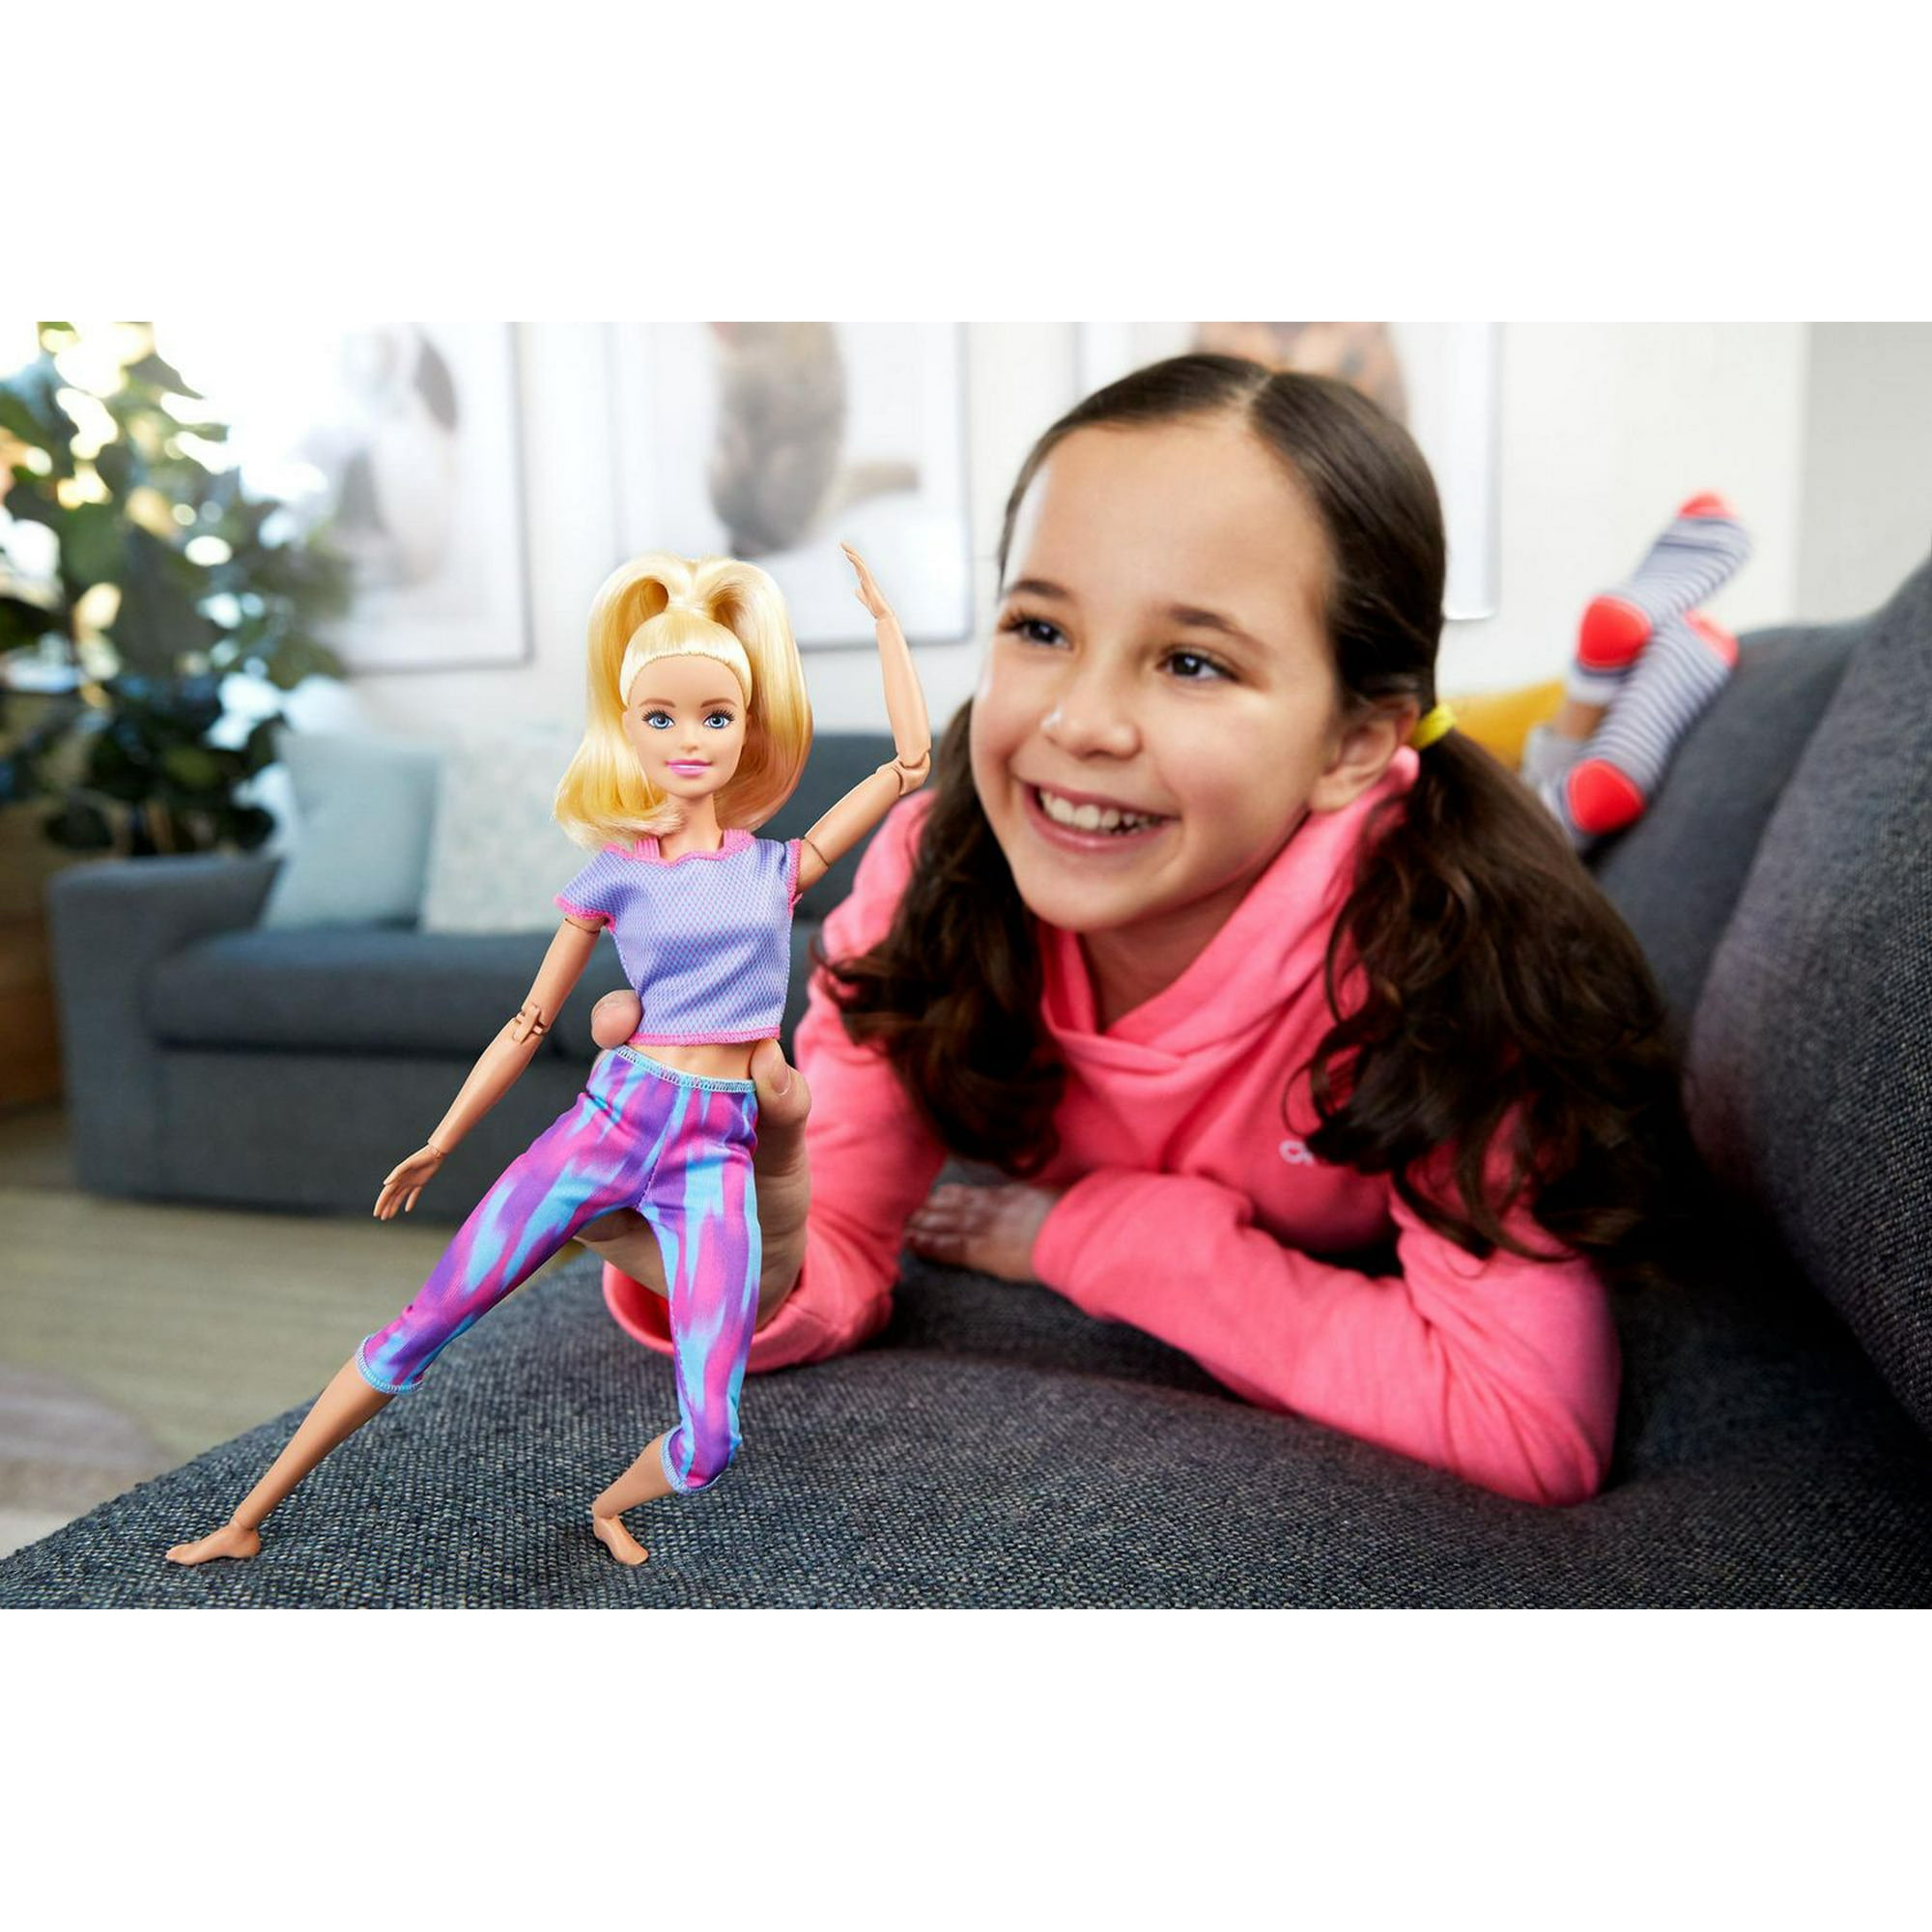 Barbie Made to Move Posable Doll in Pink Color-Blocked Top and Yoga  Leggings, Flexible with Blonde Hair ( Exclusive)